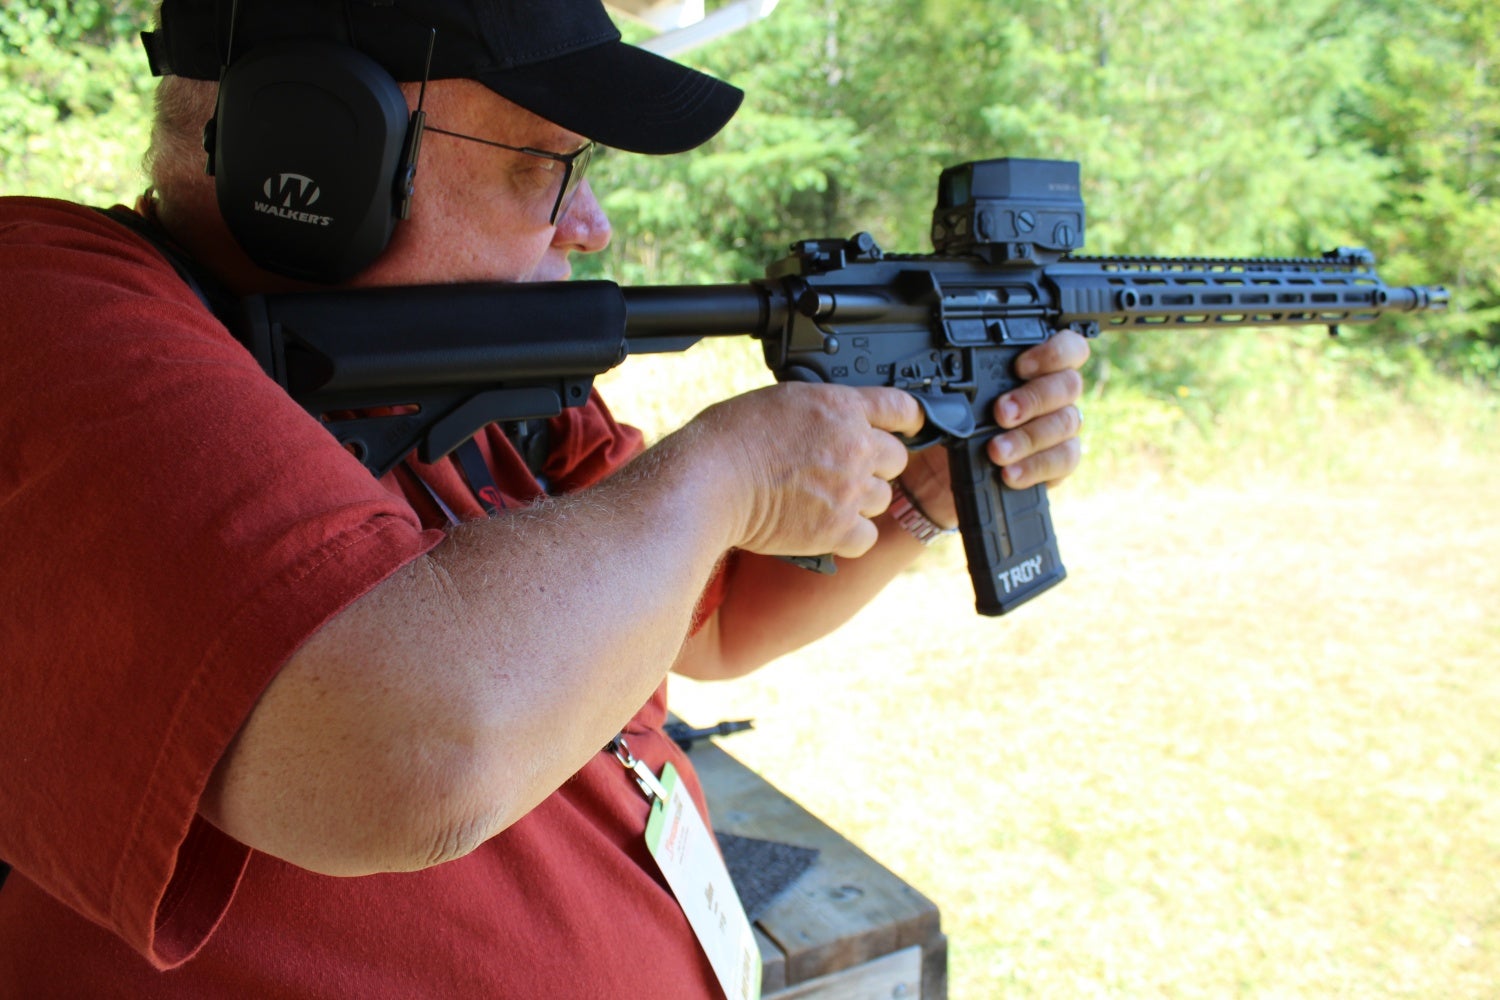 The author firing a rifle with the RTS Trigger Shield in place.